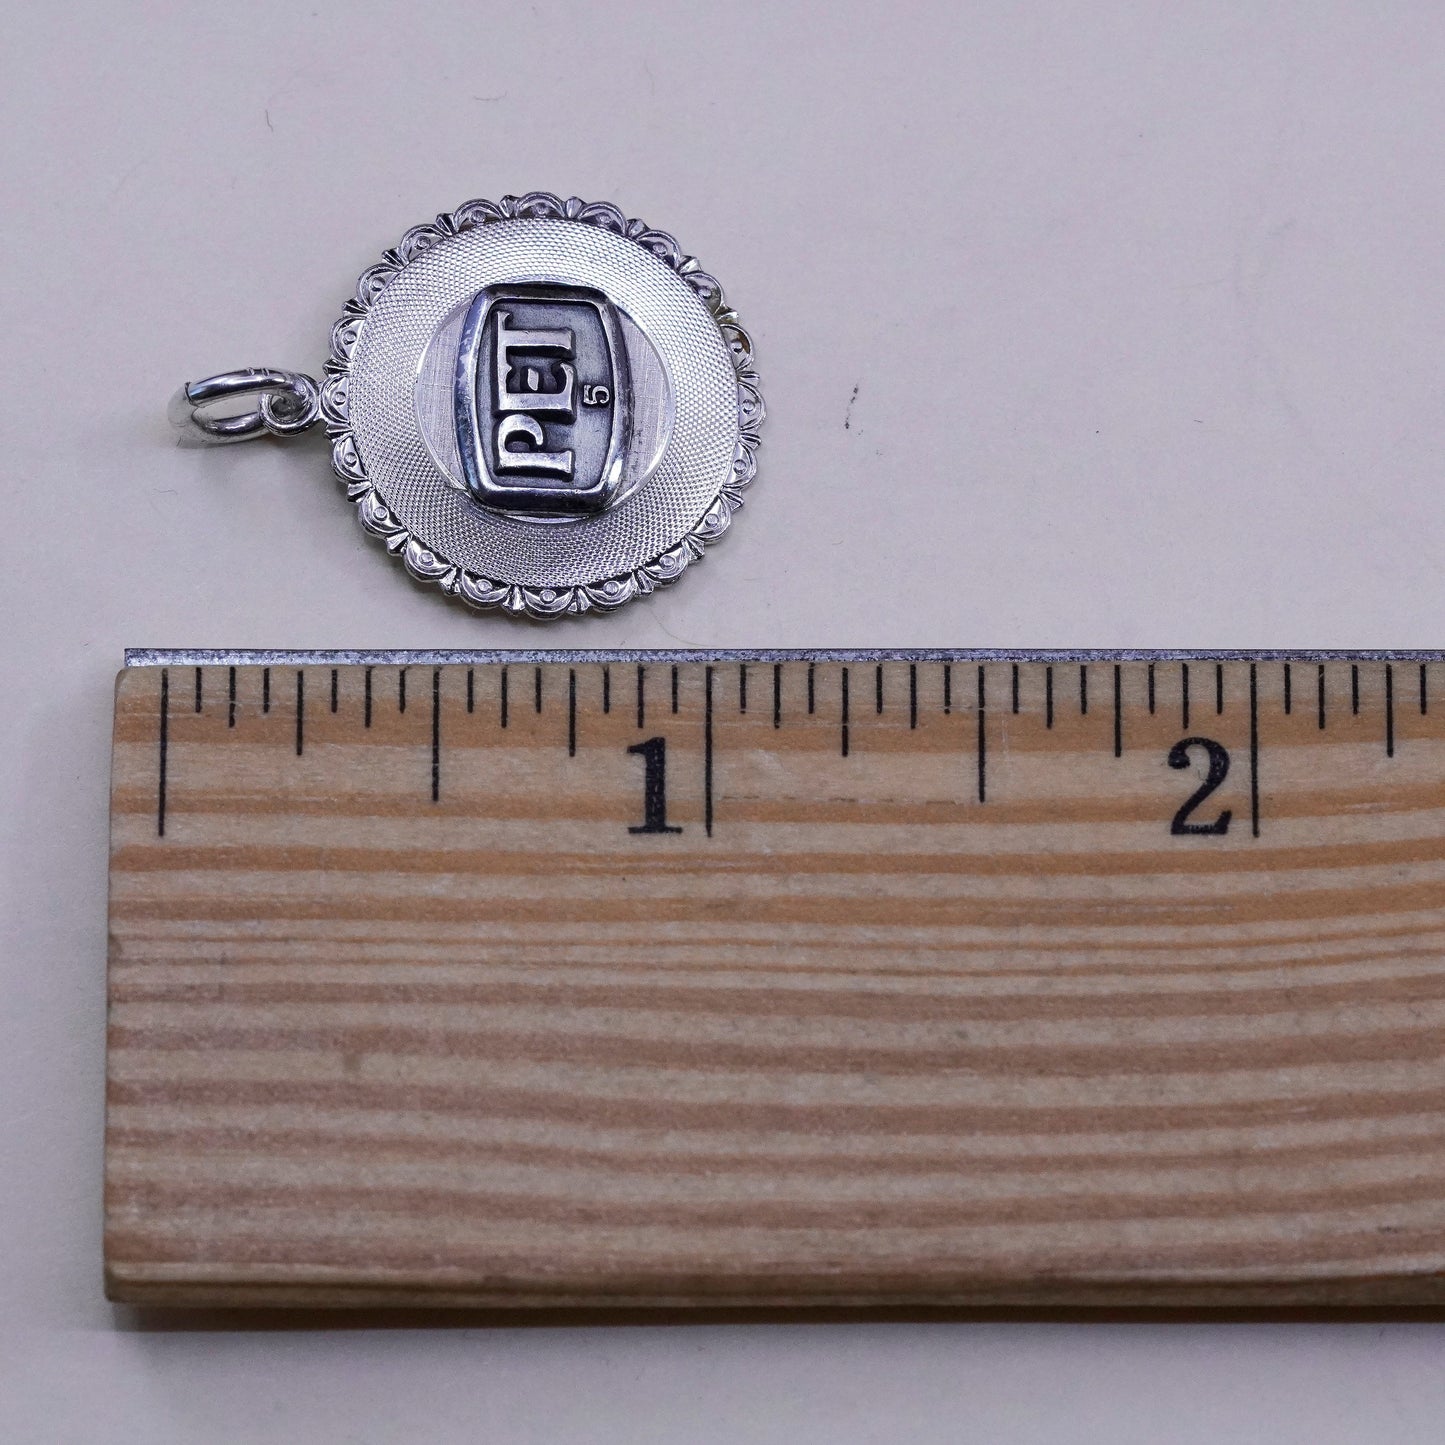 Vintage sterling silver handmade pendant, 925 tag charm with initial “PET”